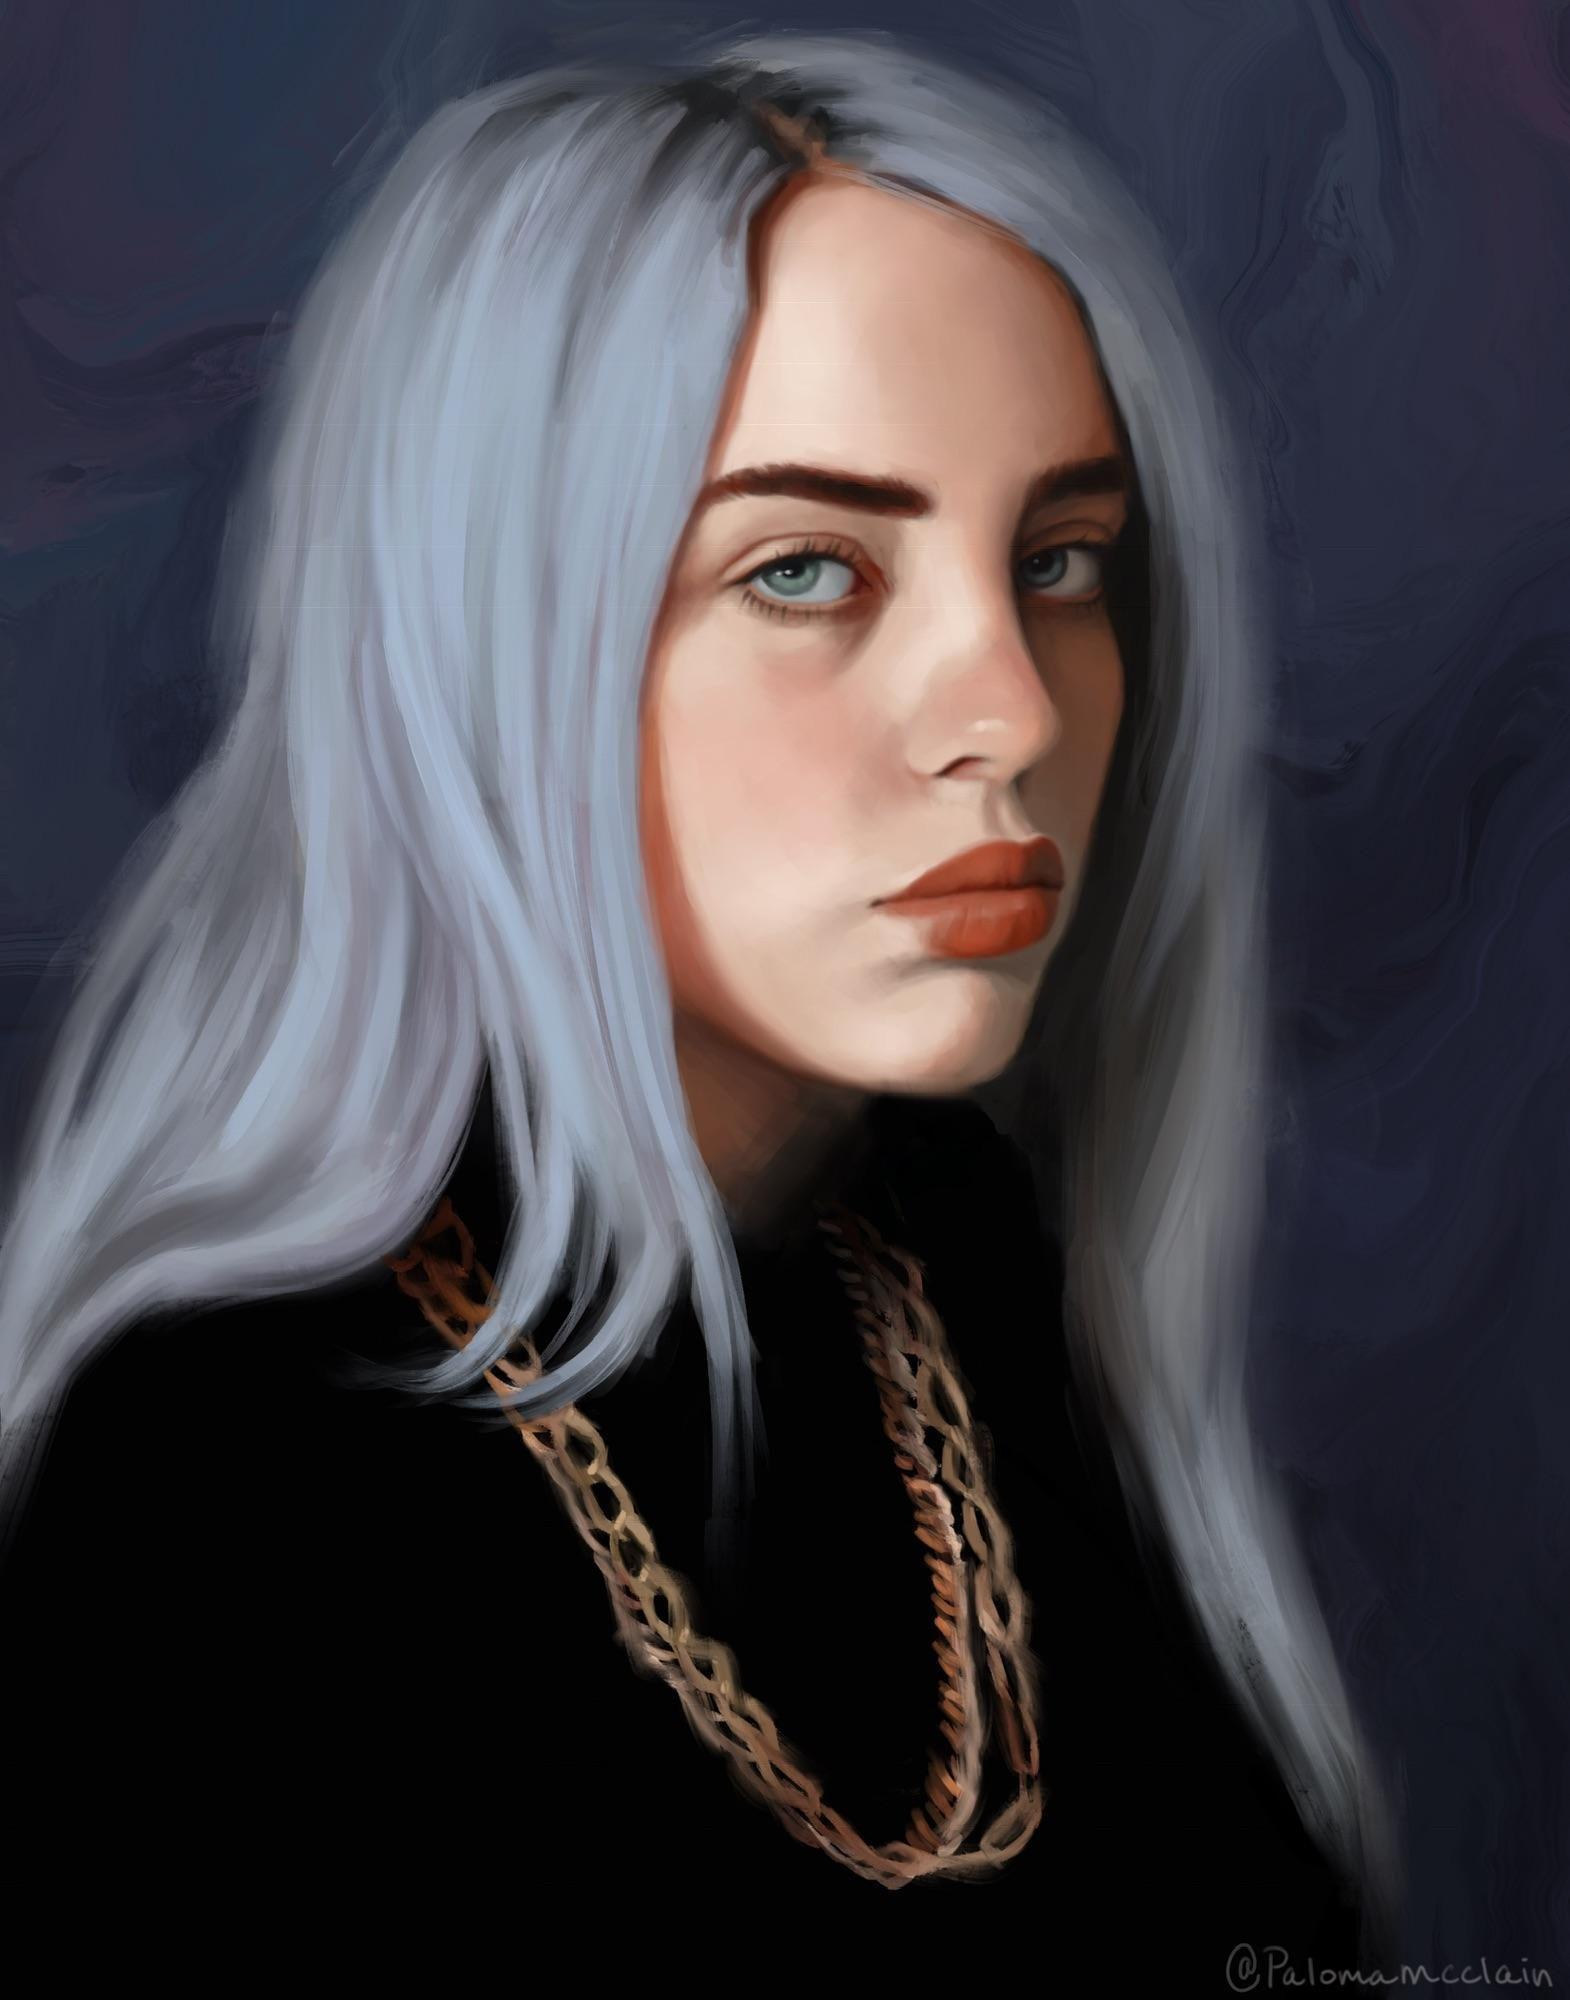 Billie Eilish Wallpaper for Android